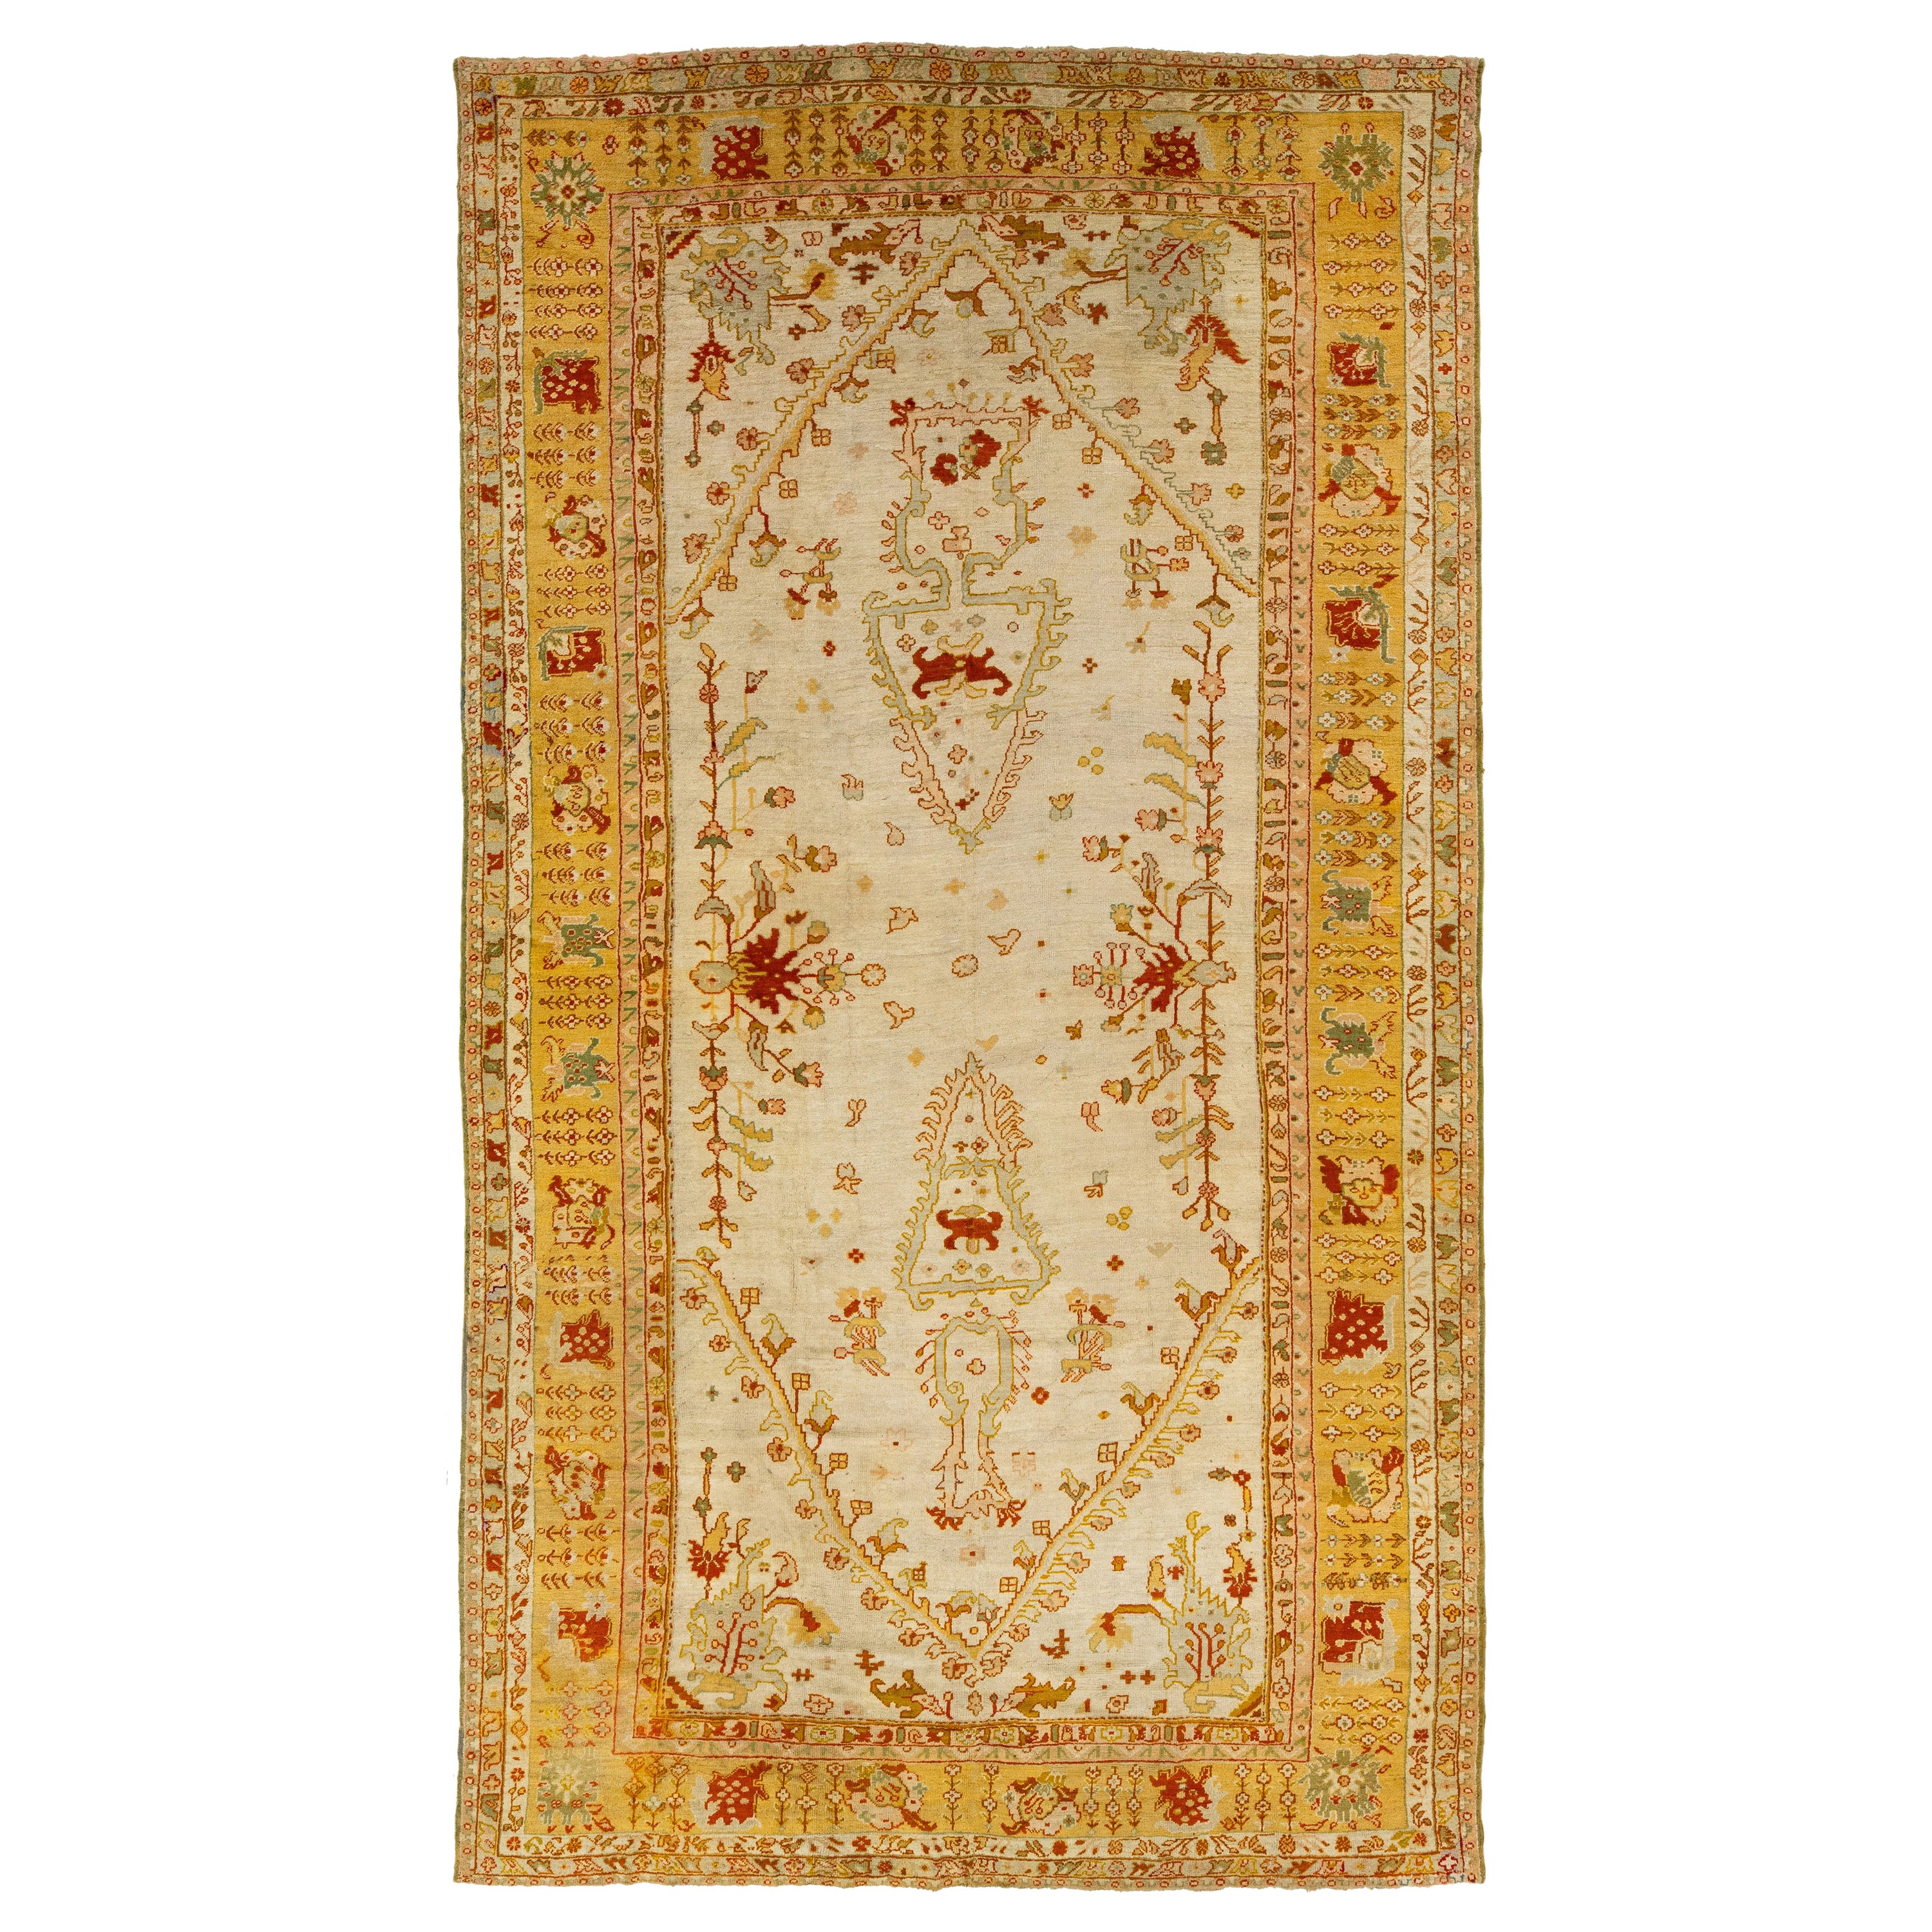 19th Century Turkish Oushak Wool Rug In Beige Color And Allover Motif